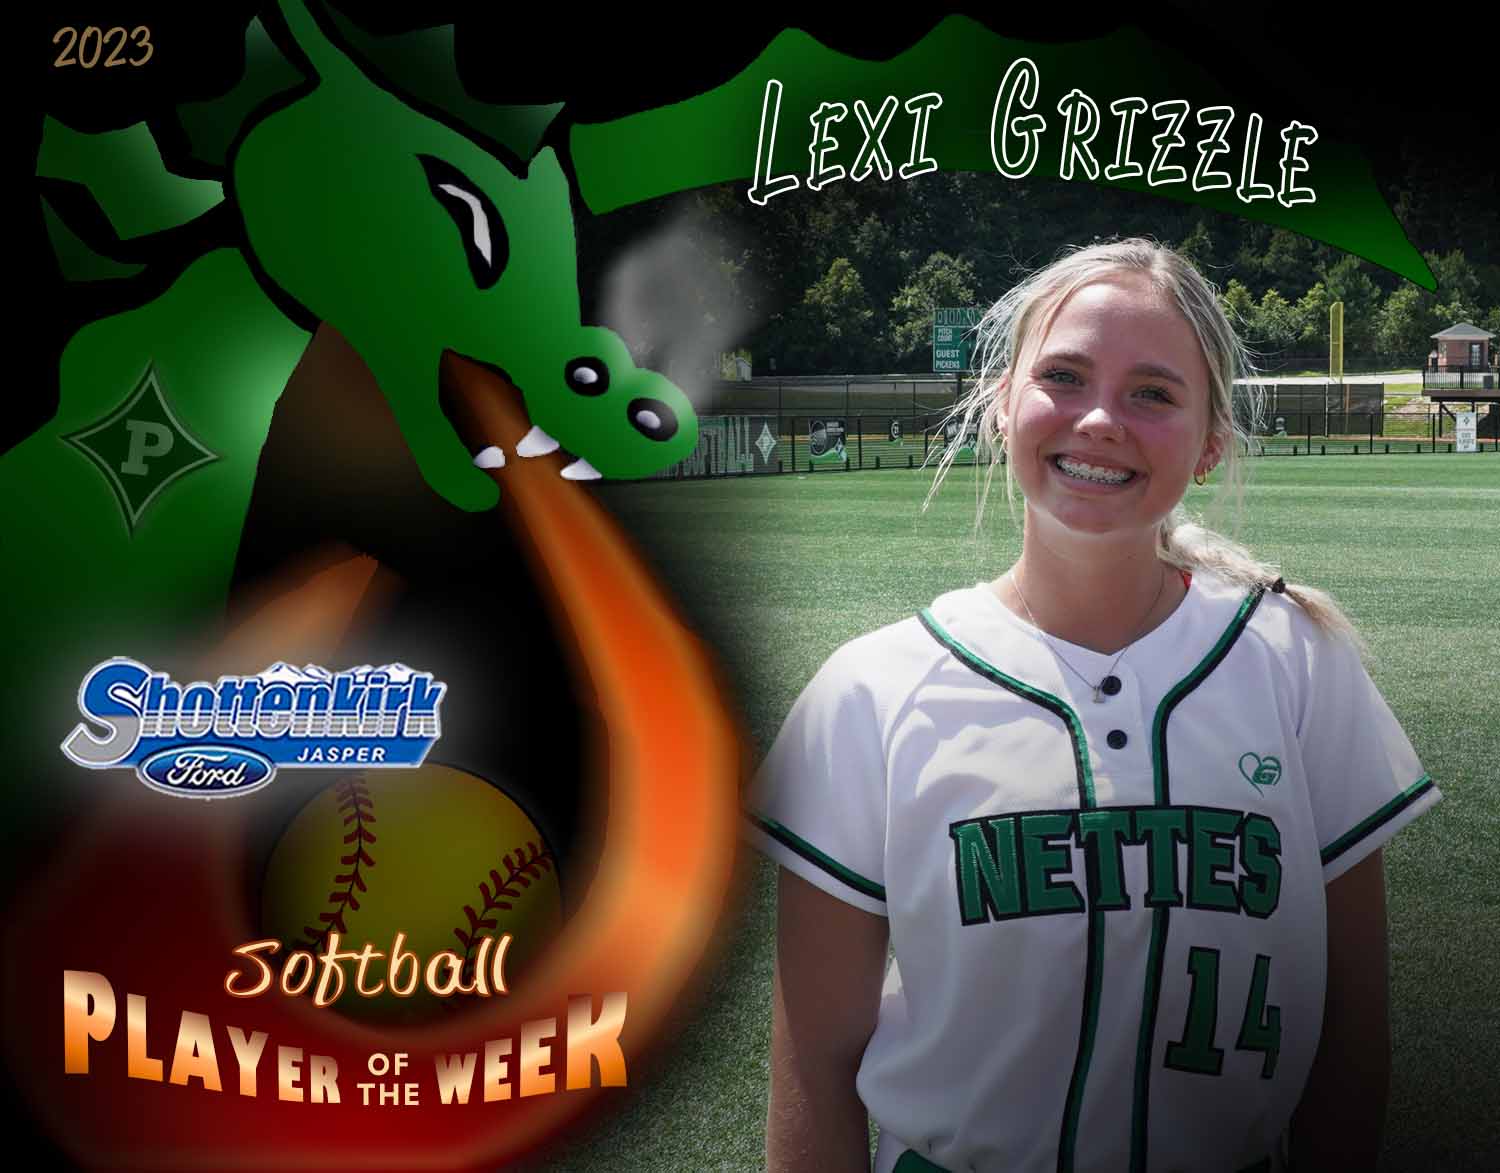 PHS Softball Player of the Week #1 - Lexi Grizzle